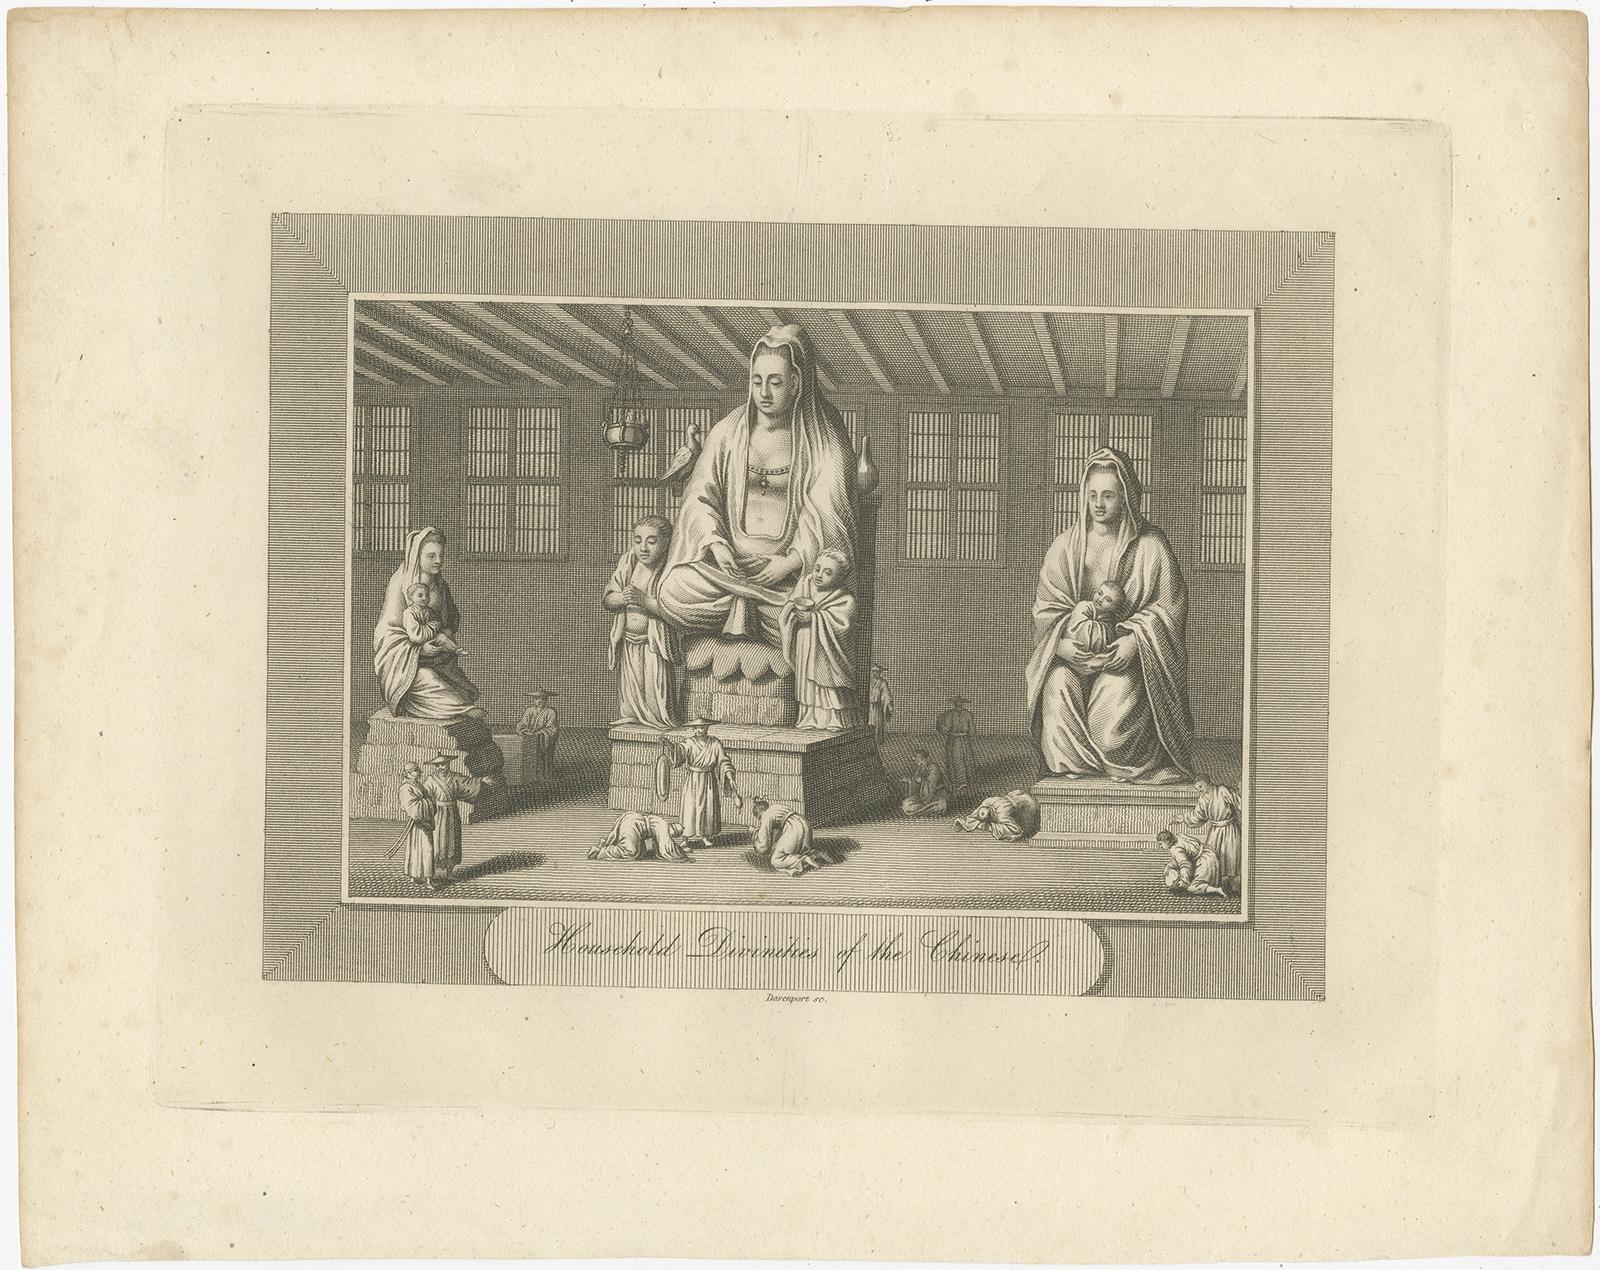 Antique print titled 'Household Divinities of the Chinese'. 

Engraving of a Chinese deities. This print originates from 'The World: or the Present State of the Universe. Being a General and Complete Collection of Modern Voyages and Travels' by